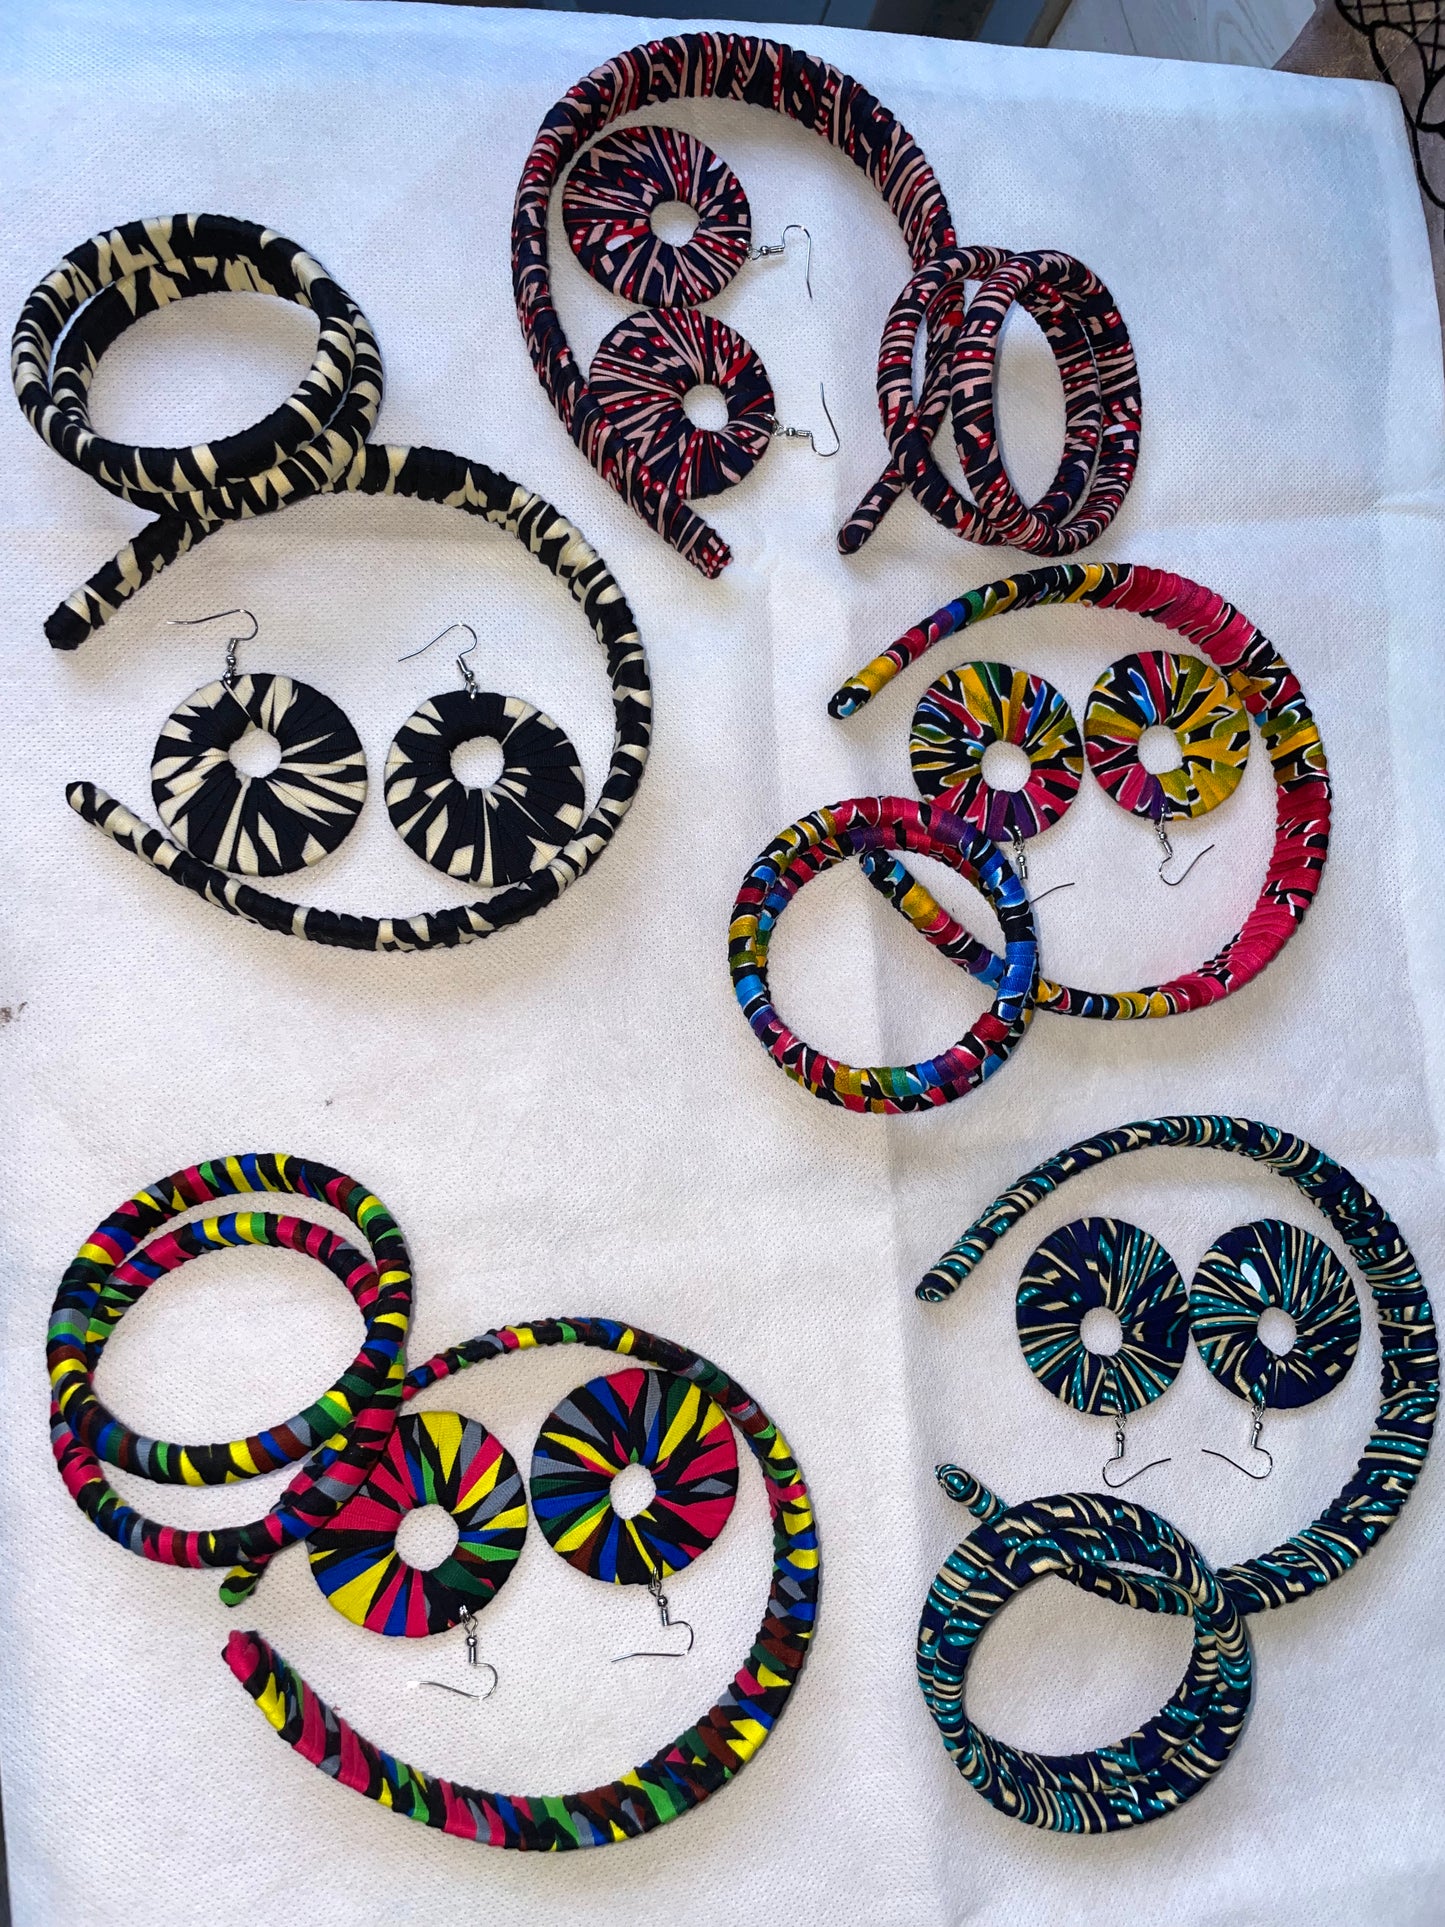 4 Pcs  African Jewelry Set 1 Headband, 1 pair of Earrings, and 2 Bracelets